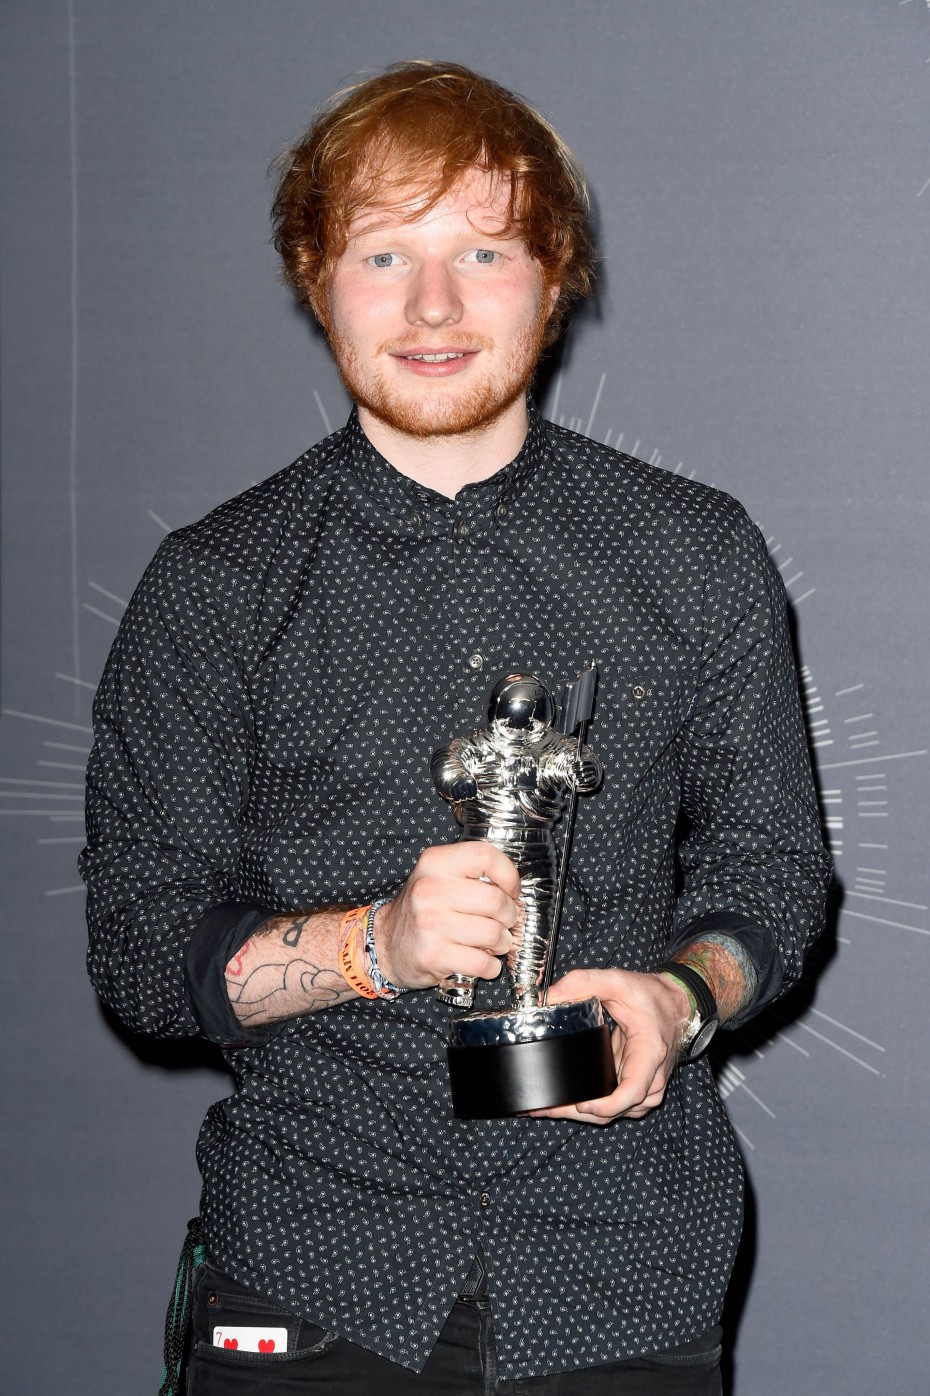 Ed Sheeran won Best Male for his song, Sing feat. Pharrell Williams, at the 2014 MTV Video Music Awards.